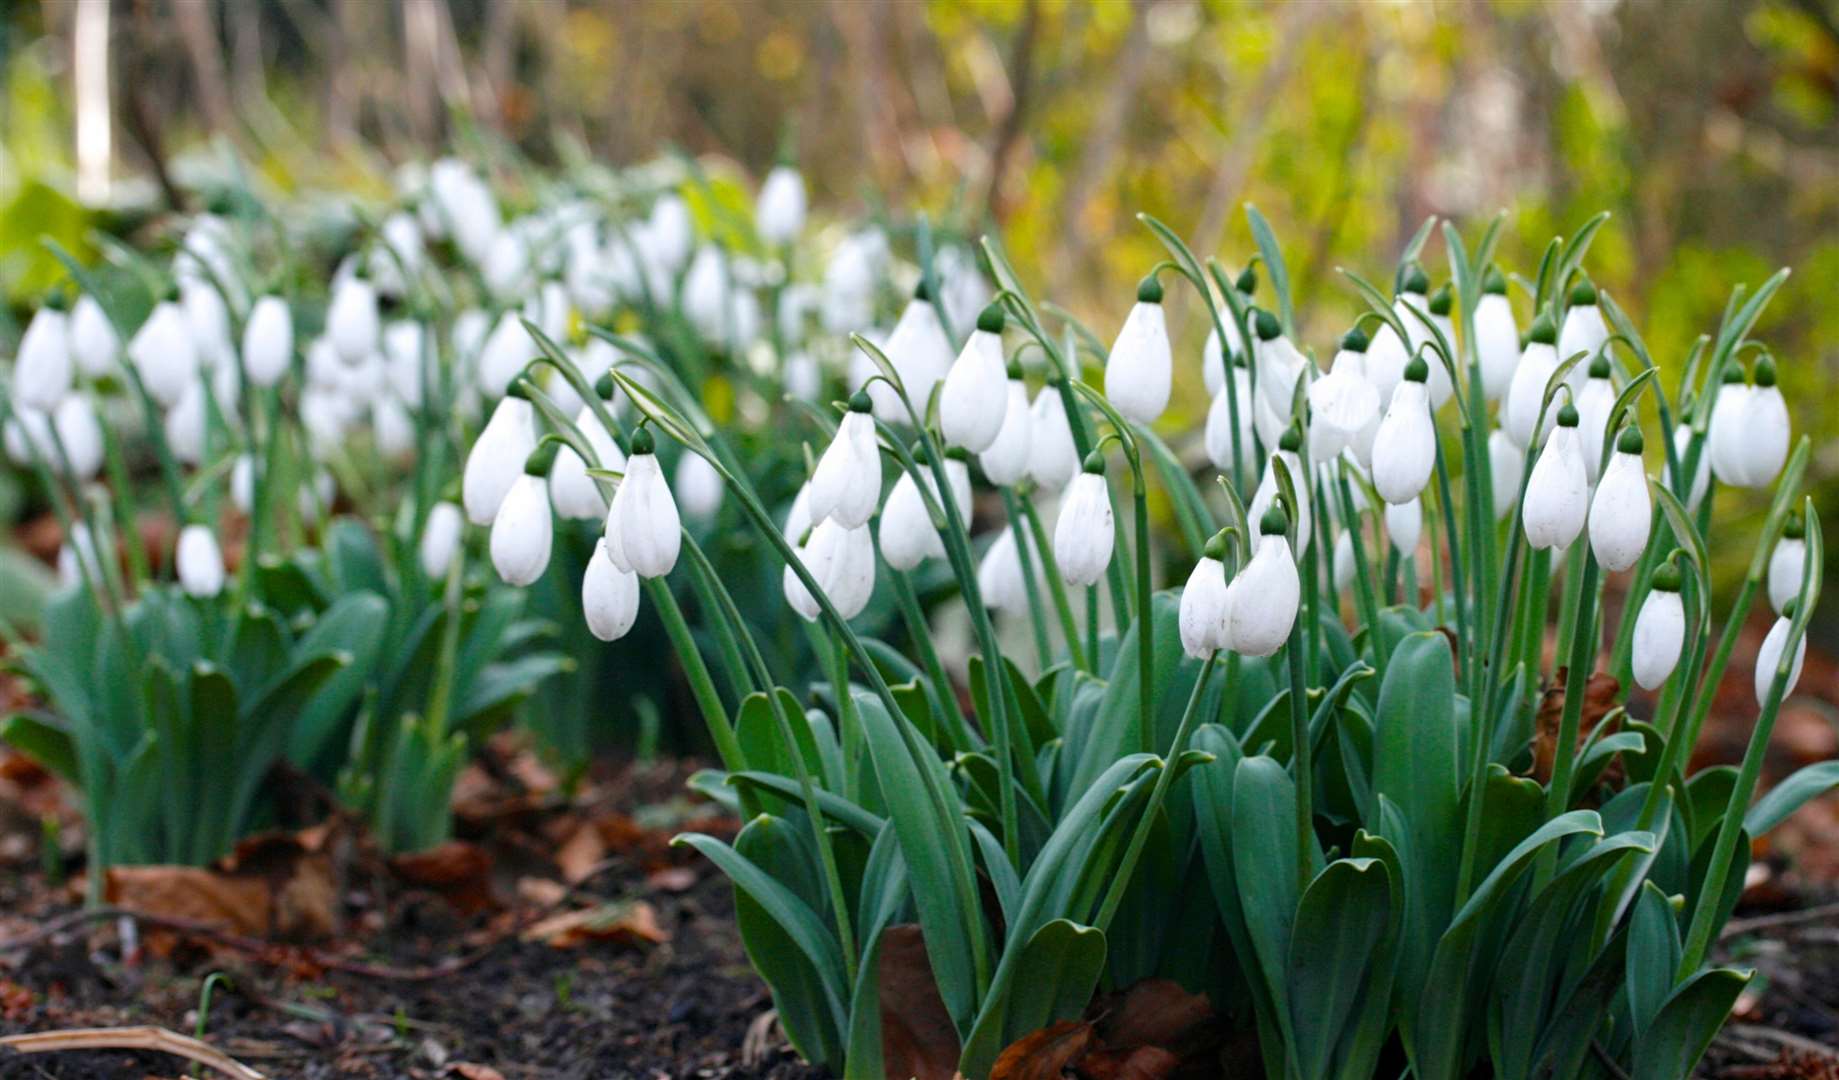 The Snowdrop Sensation is one of Great Comp’s most popular events of the year. Picture: Great Comp